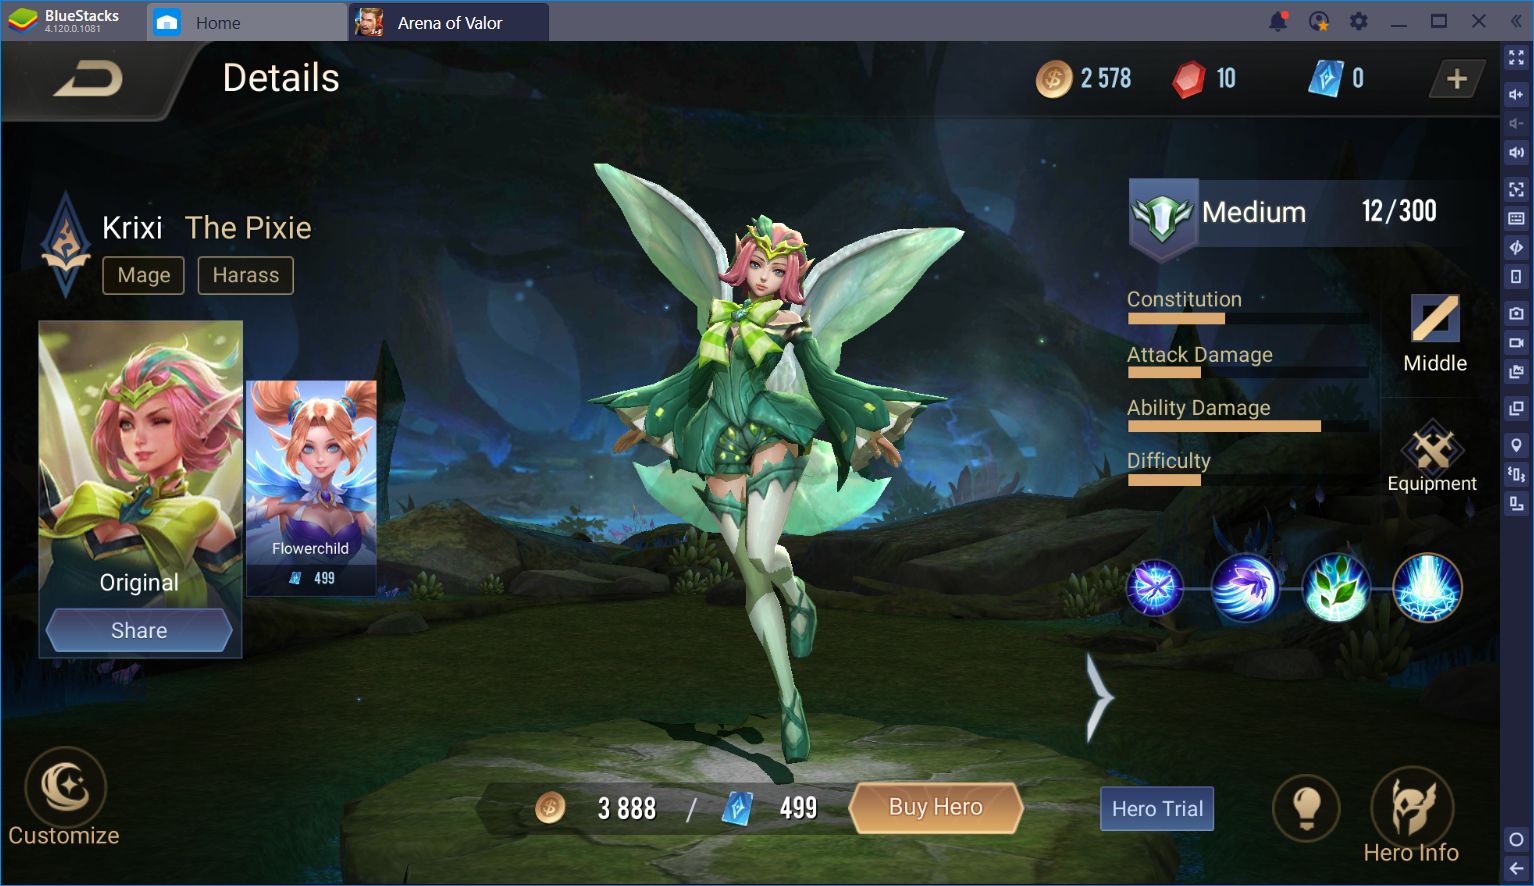 The Different Character Types in Arena of Valor